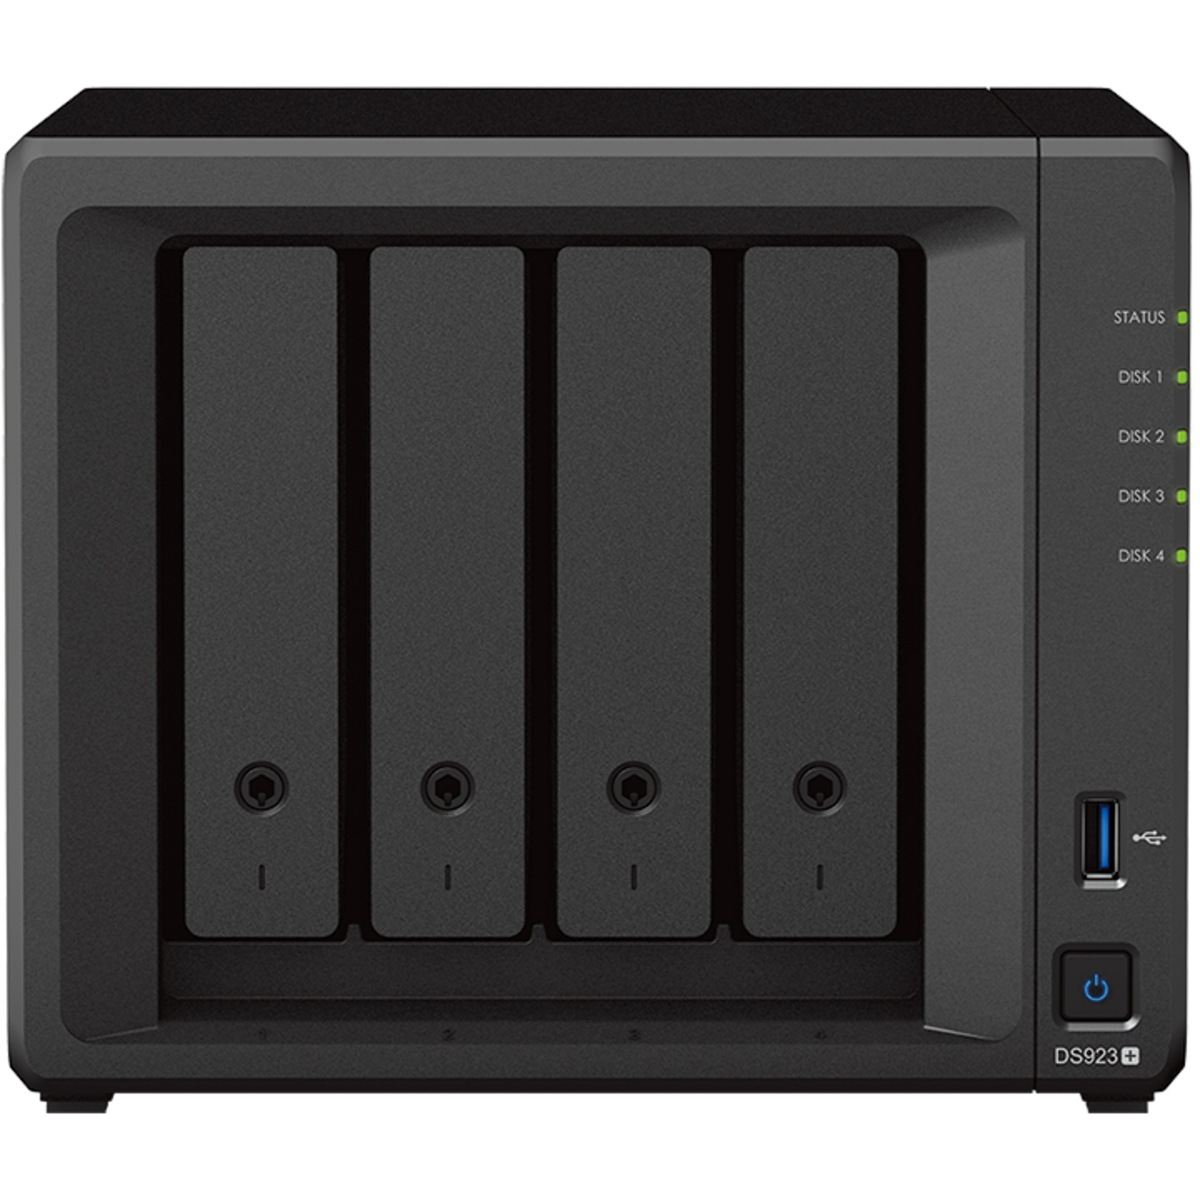 Synology DiskStation DS923+ 36tb 4-Bay Desktop Multimedia / Power User / Business NAS - Network Attached Storage Device 3x12tb Seagate IronWolf Pro ST12000NT001 3.5 7200rpm SATA 6Gb/s HDD NAS Class Drives Installed - Burn-In Tested - ON SALE - FREE RAM UPGRADE DiskStation DS923+